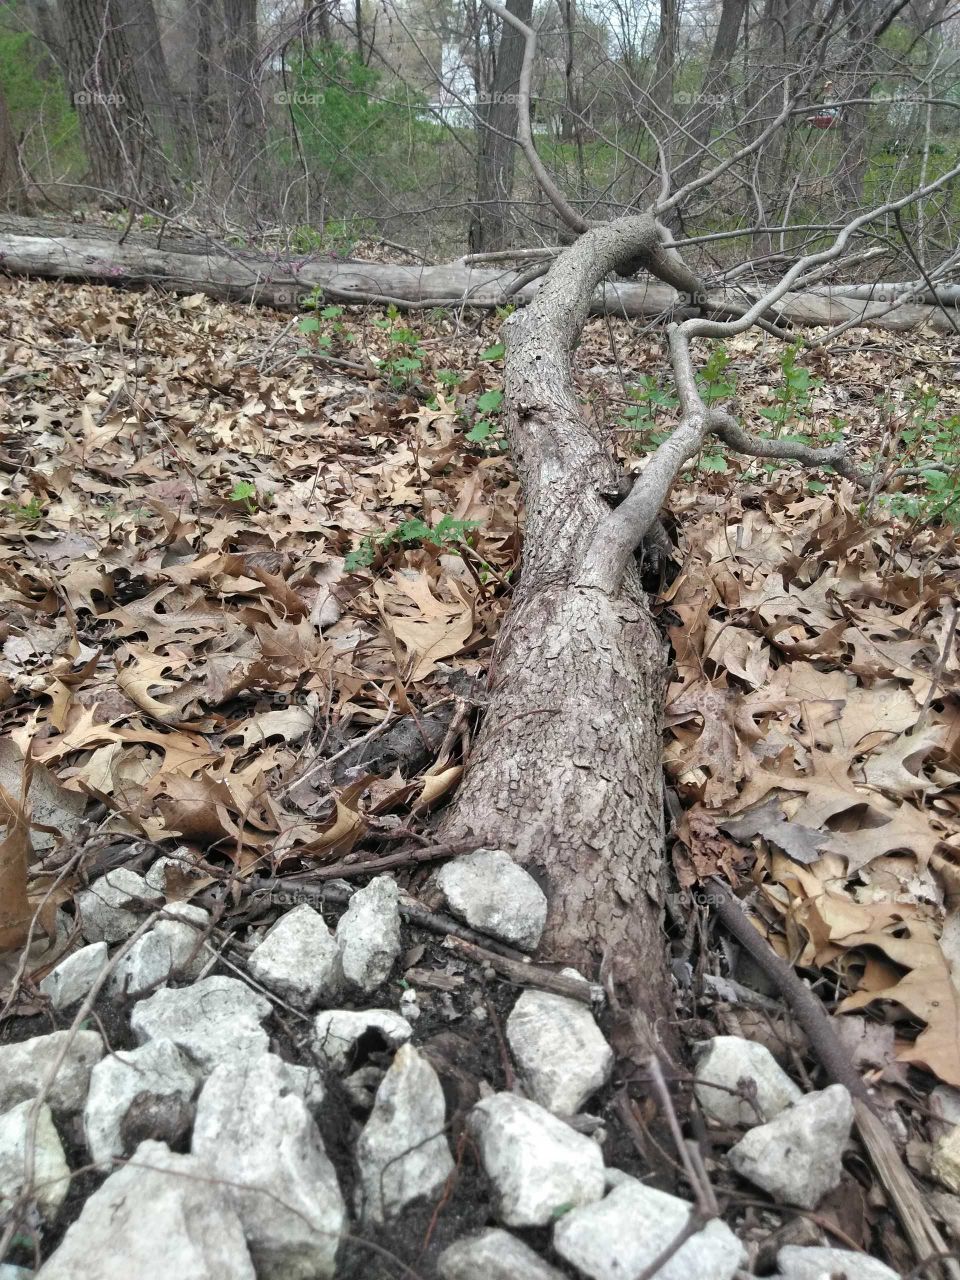 This fallen tree is a perfect example of how life will thrive through any condition. Despite it's fallen state, it continues to provide budding flowers on its brances.